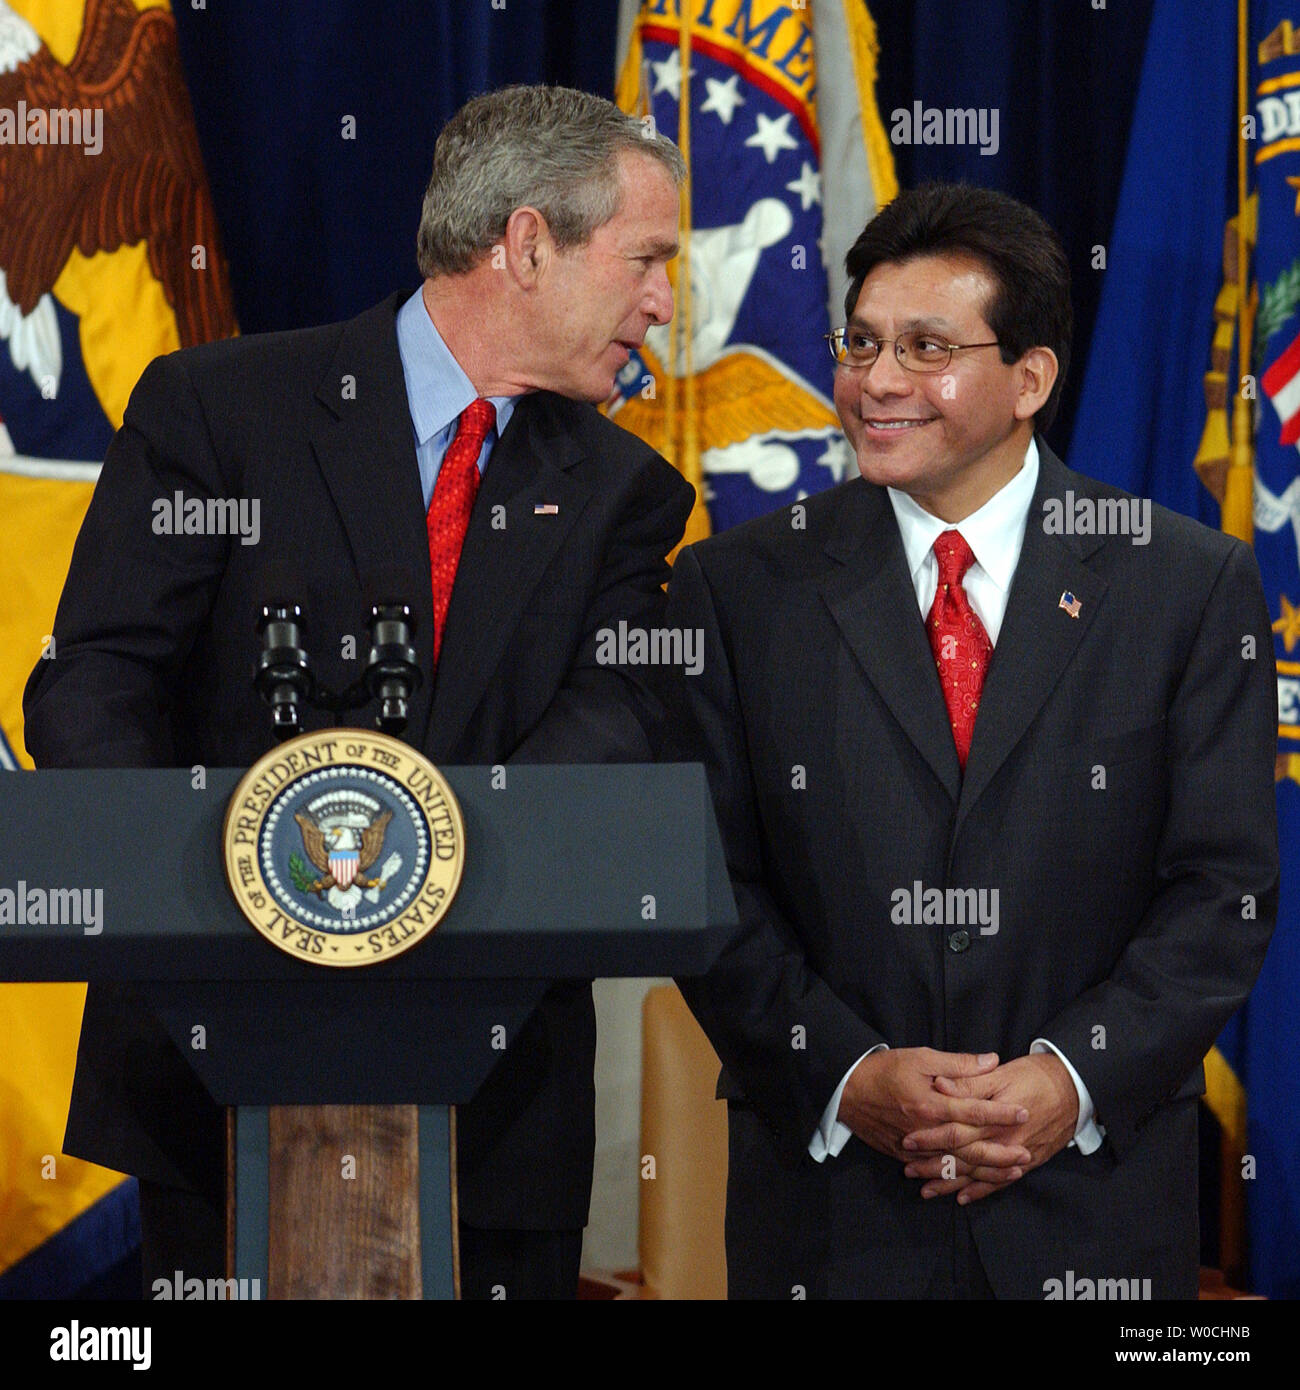 Attorney General Alberto Gonzales speaks with U.S. President George W. Bush after the Attorney General's swearing-in ceremony at the Justice Department in Washington on Feb. 14, 2005.   (UPI Photo/ROGER L. WOLLENBERG) Stock Photo